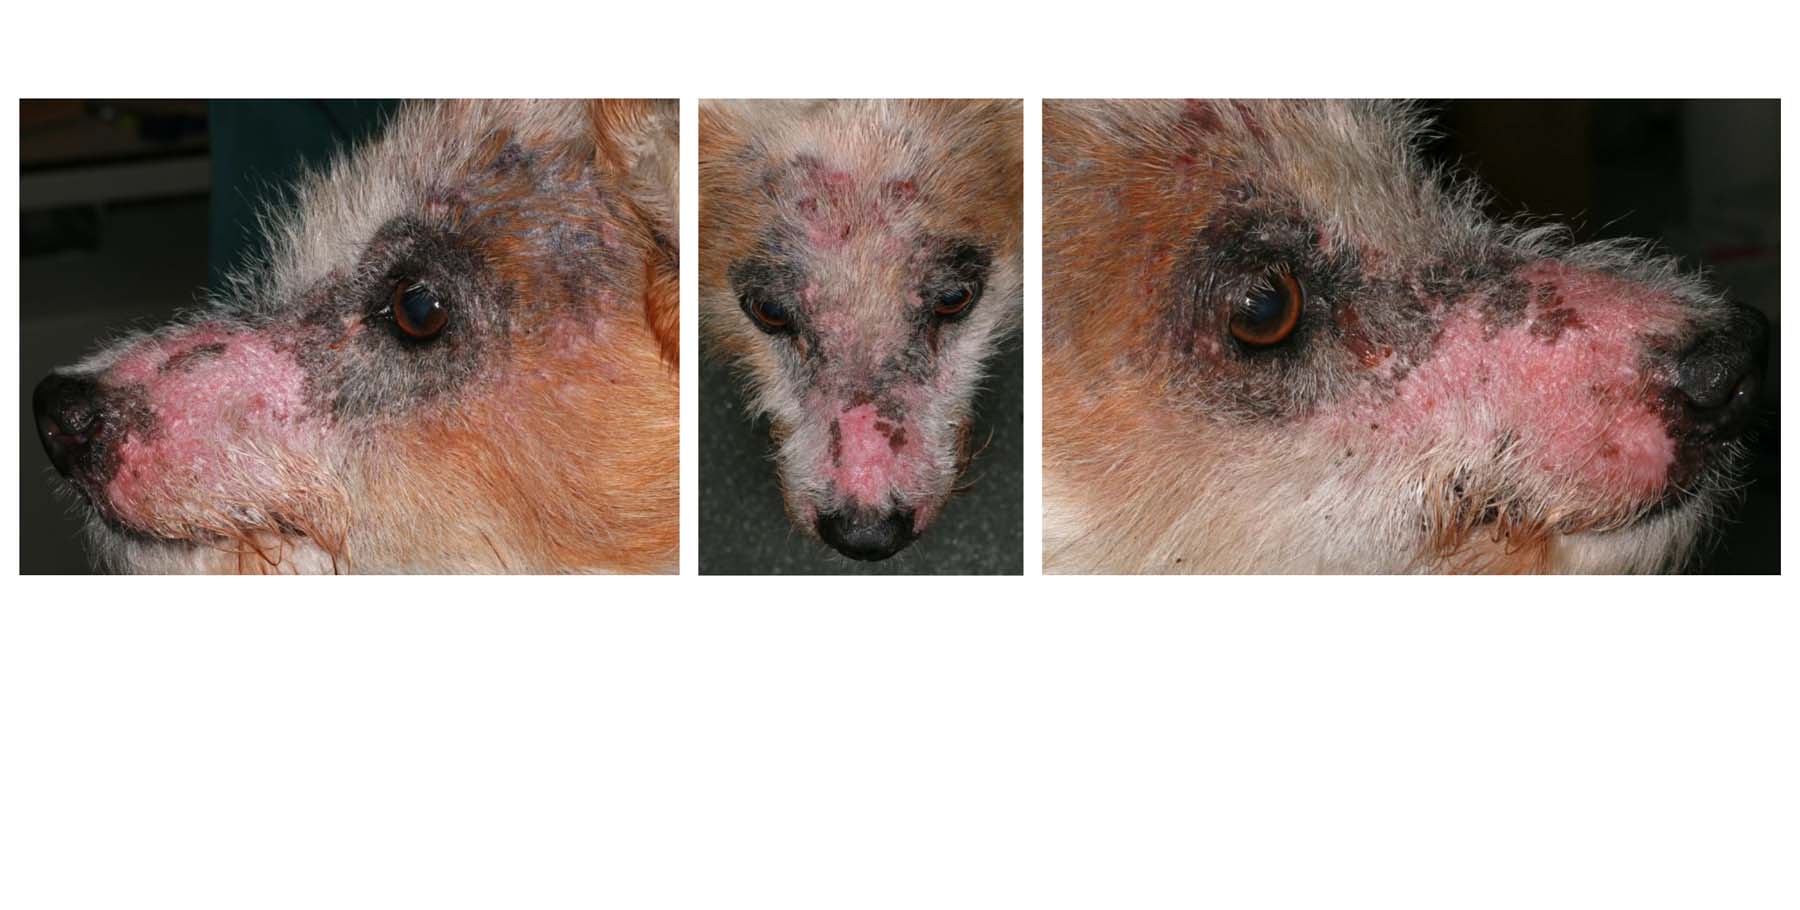 Chronic Dermatophytosis (4 Years): Trichophyton Fungal Infection diagnosed on first presentation & cured within weeks, Jack Russell Terrier